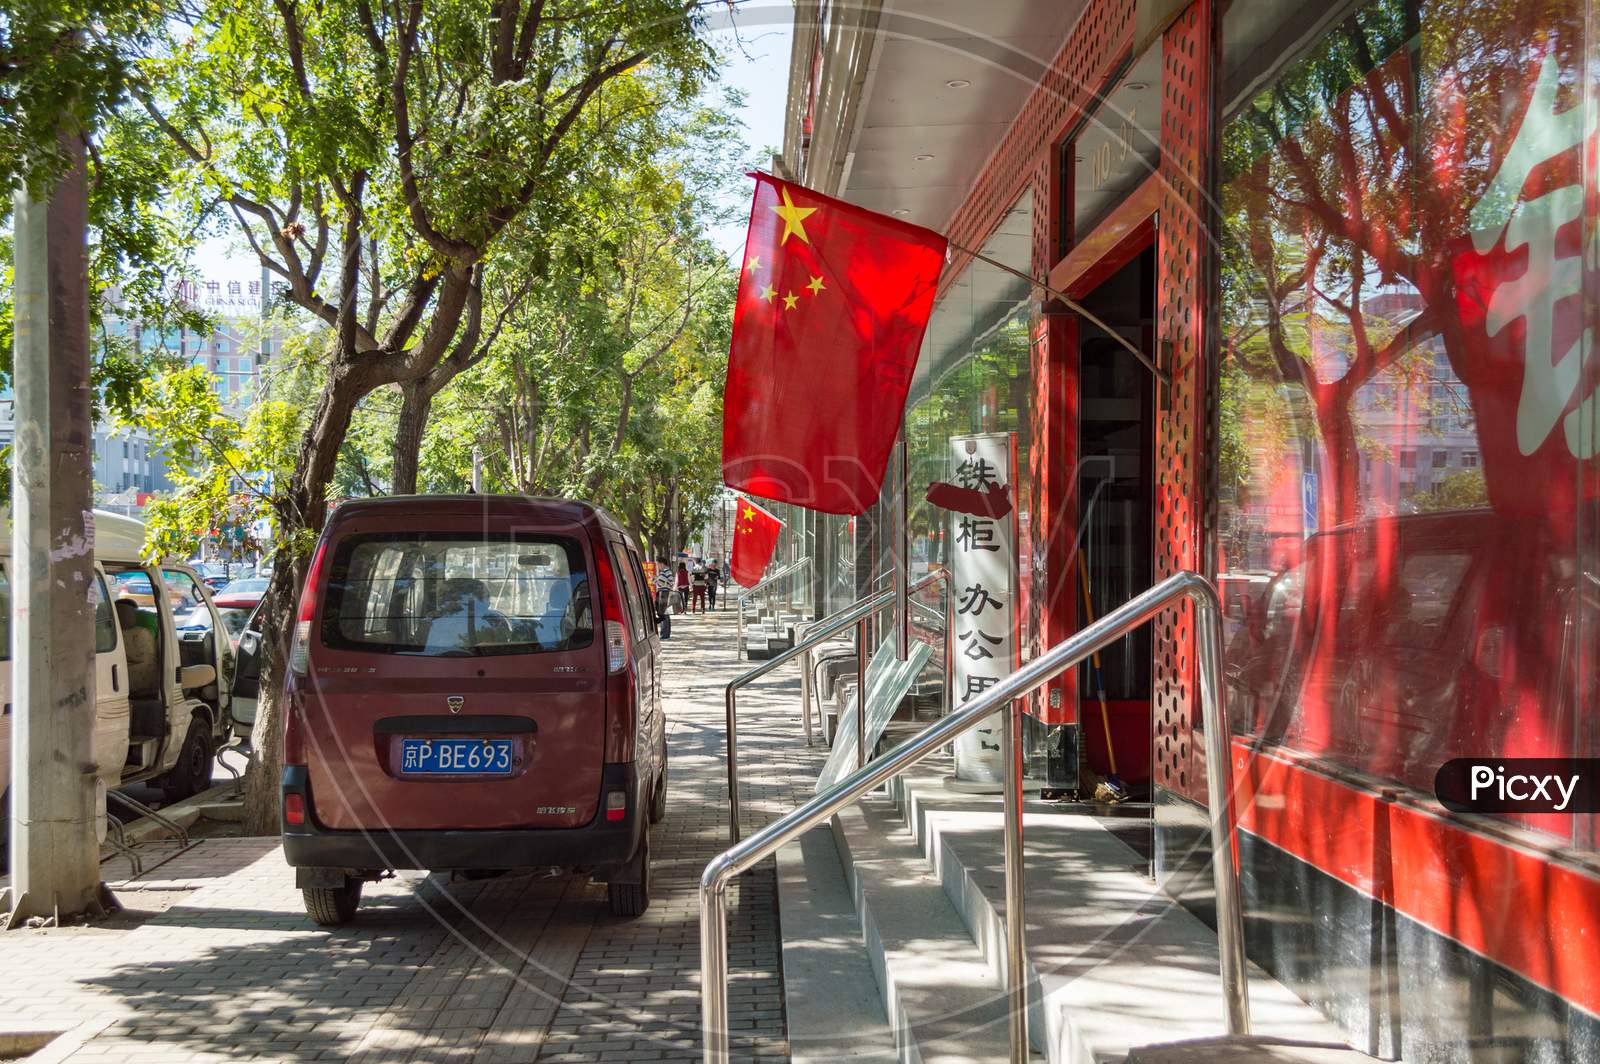 National Flags Of The People'S Republic Of China In The Streets Of Beijing